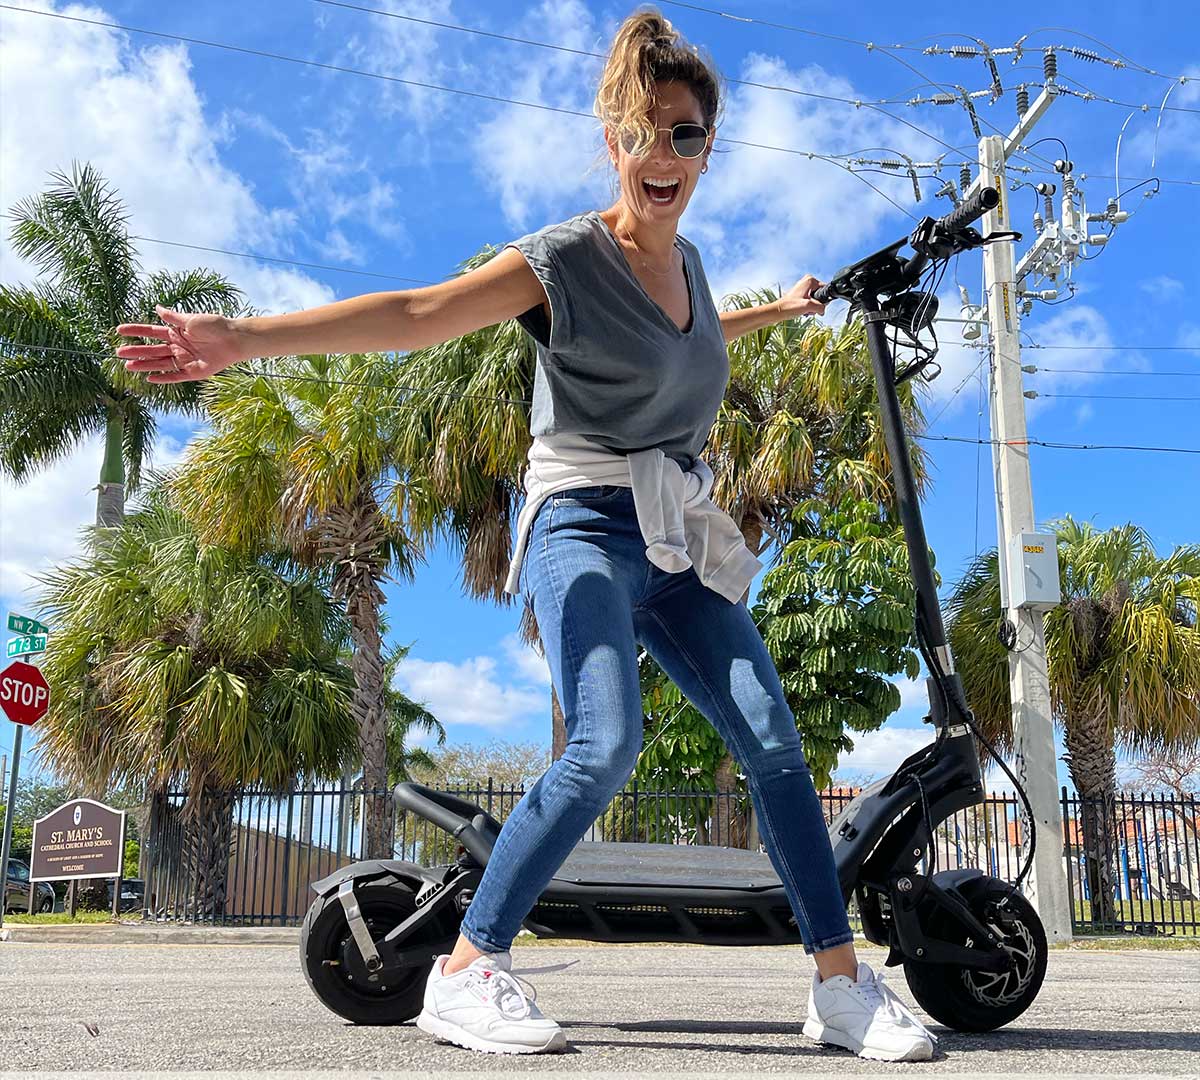 A woman expresses joy while balancing on an electric scooter, symbolizing the fun and eco-friendly benefits of electric mobility.